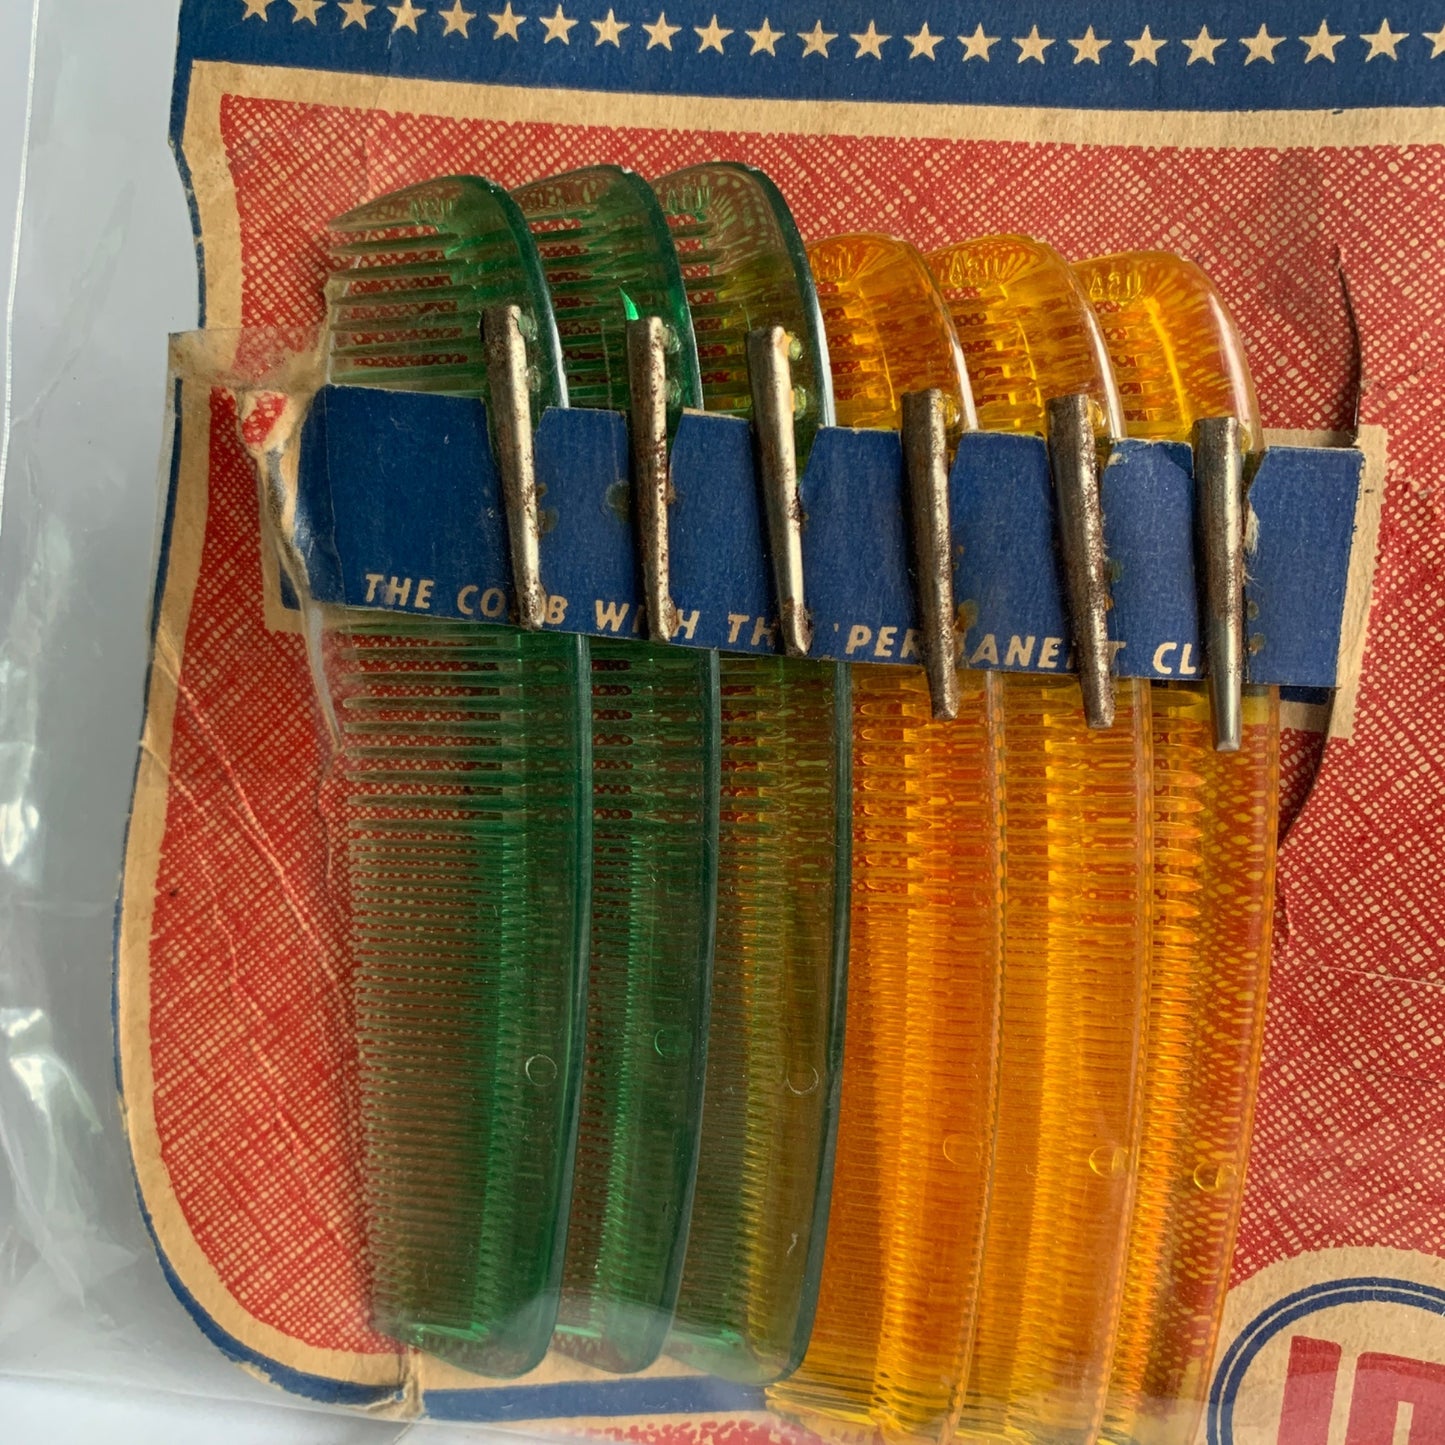 All American Clip Comb Store Display with Combs Complete Full Set of 12 Vintage